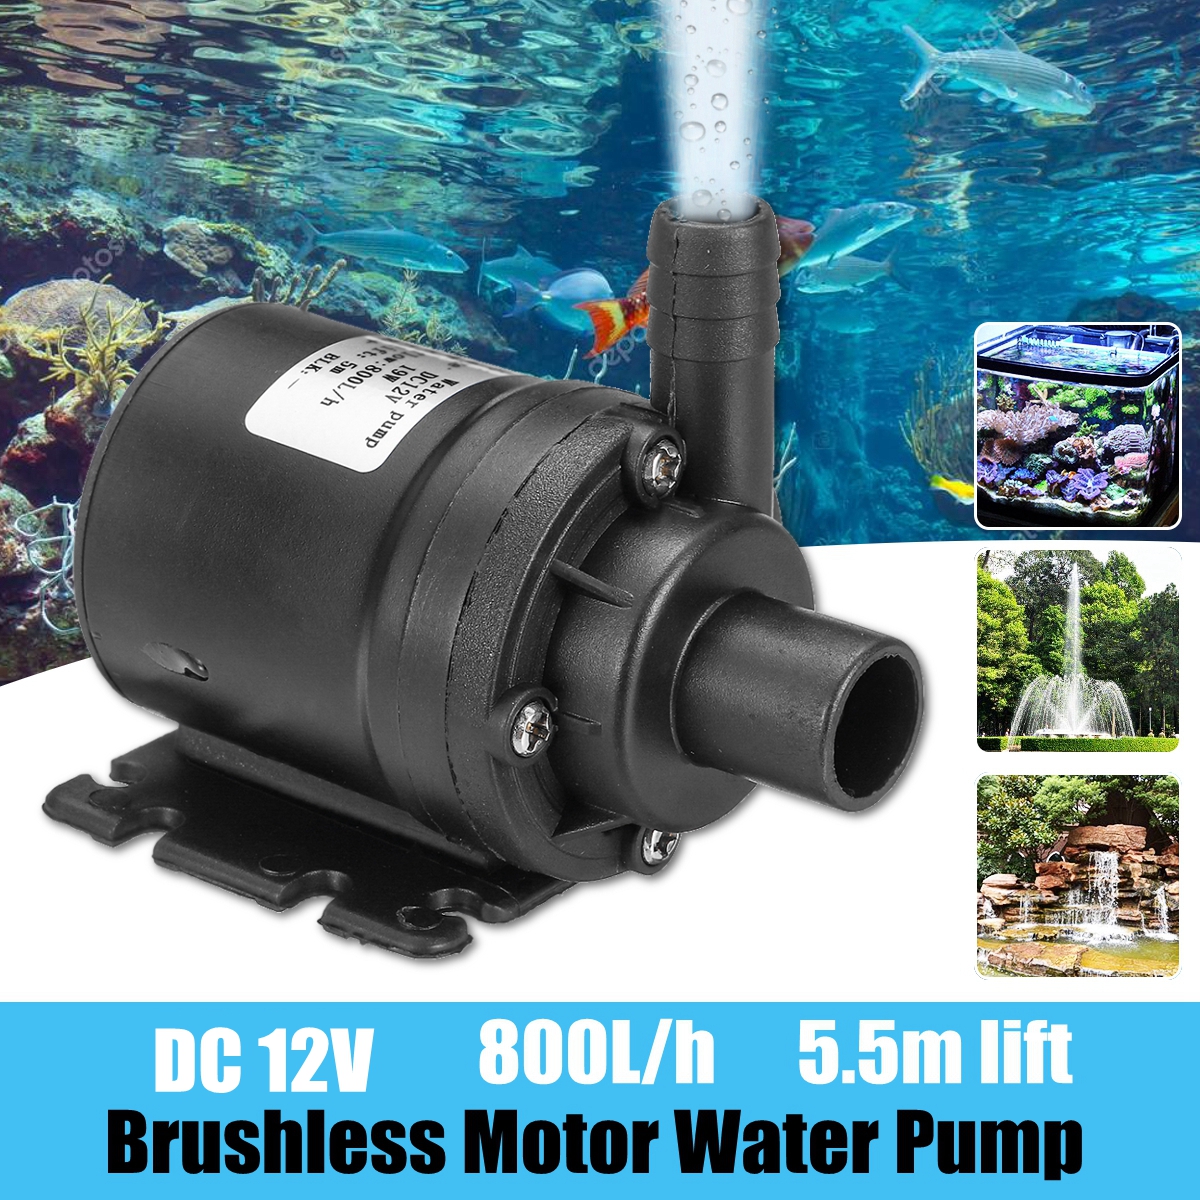 ZYW680-DC-12V-Water-Pump-Ultra-Quiet-Mini-55m-Lift-Brushless-Motor-Submersible-Water-Pump-1531599-2